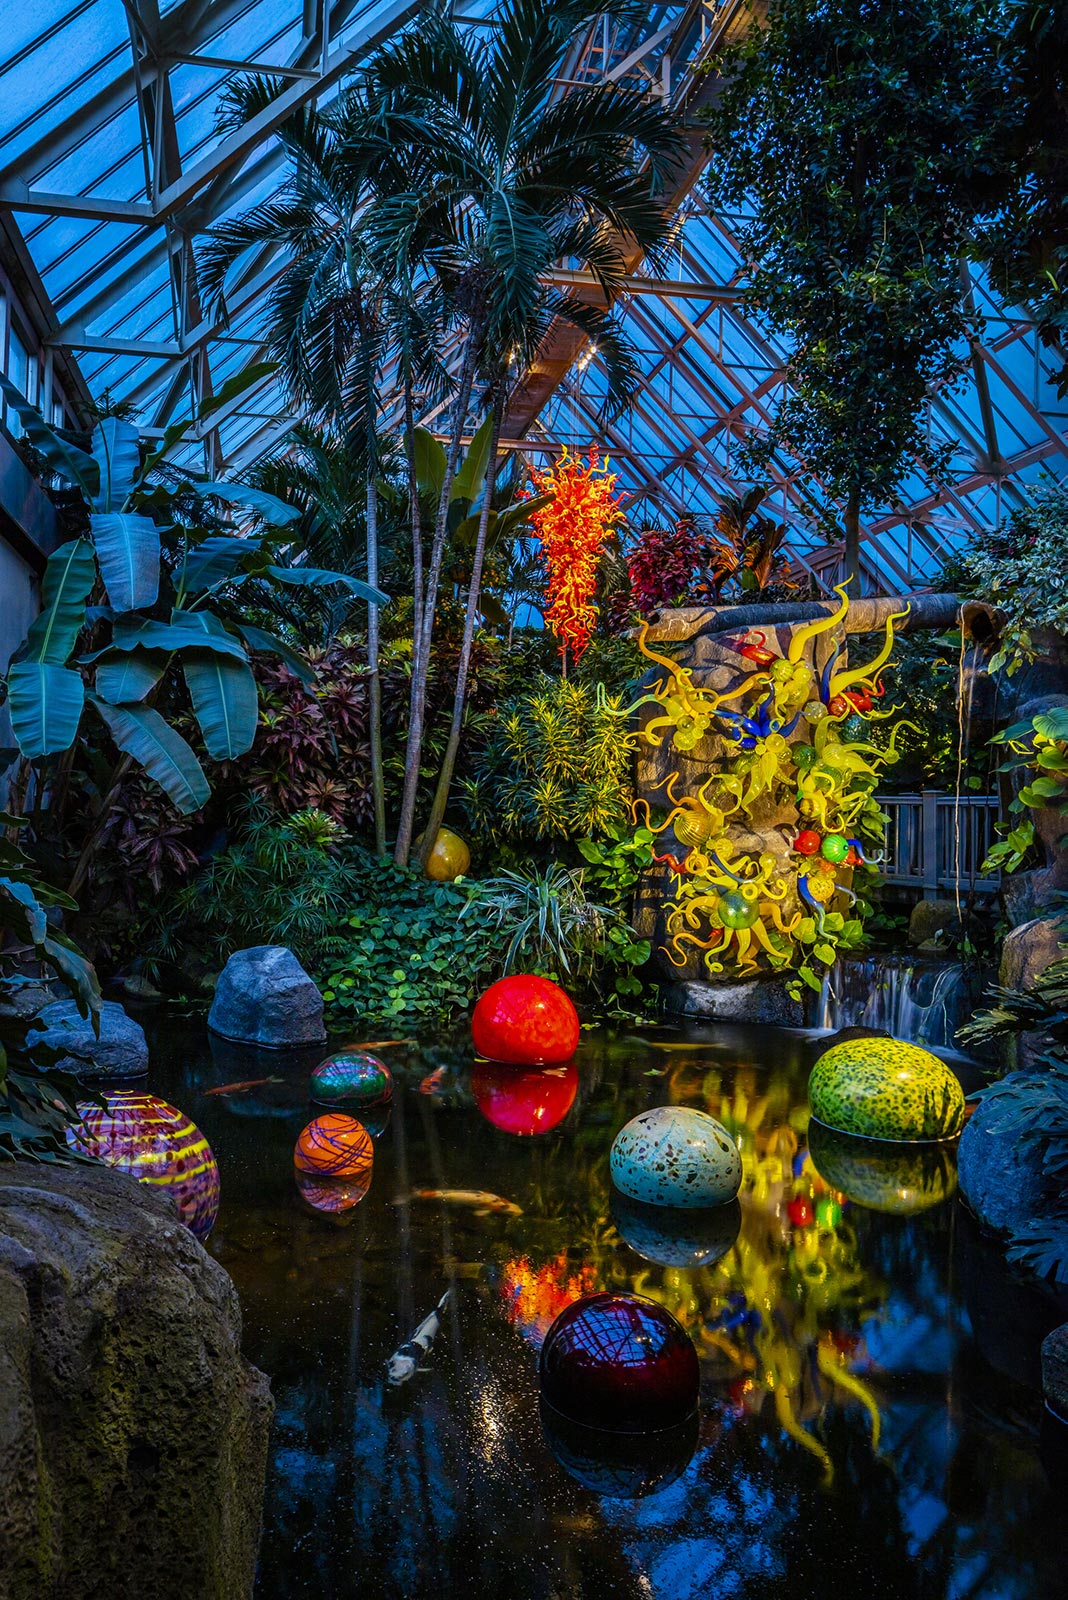 Niijima Floats (2003), Sunset Chandelier (2019), and Anemones (2019) by Dale Chihuly